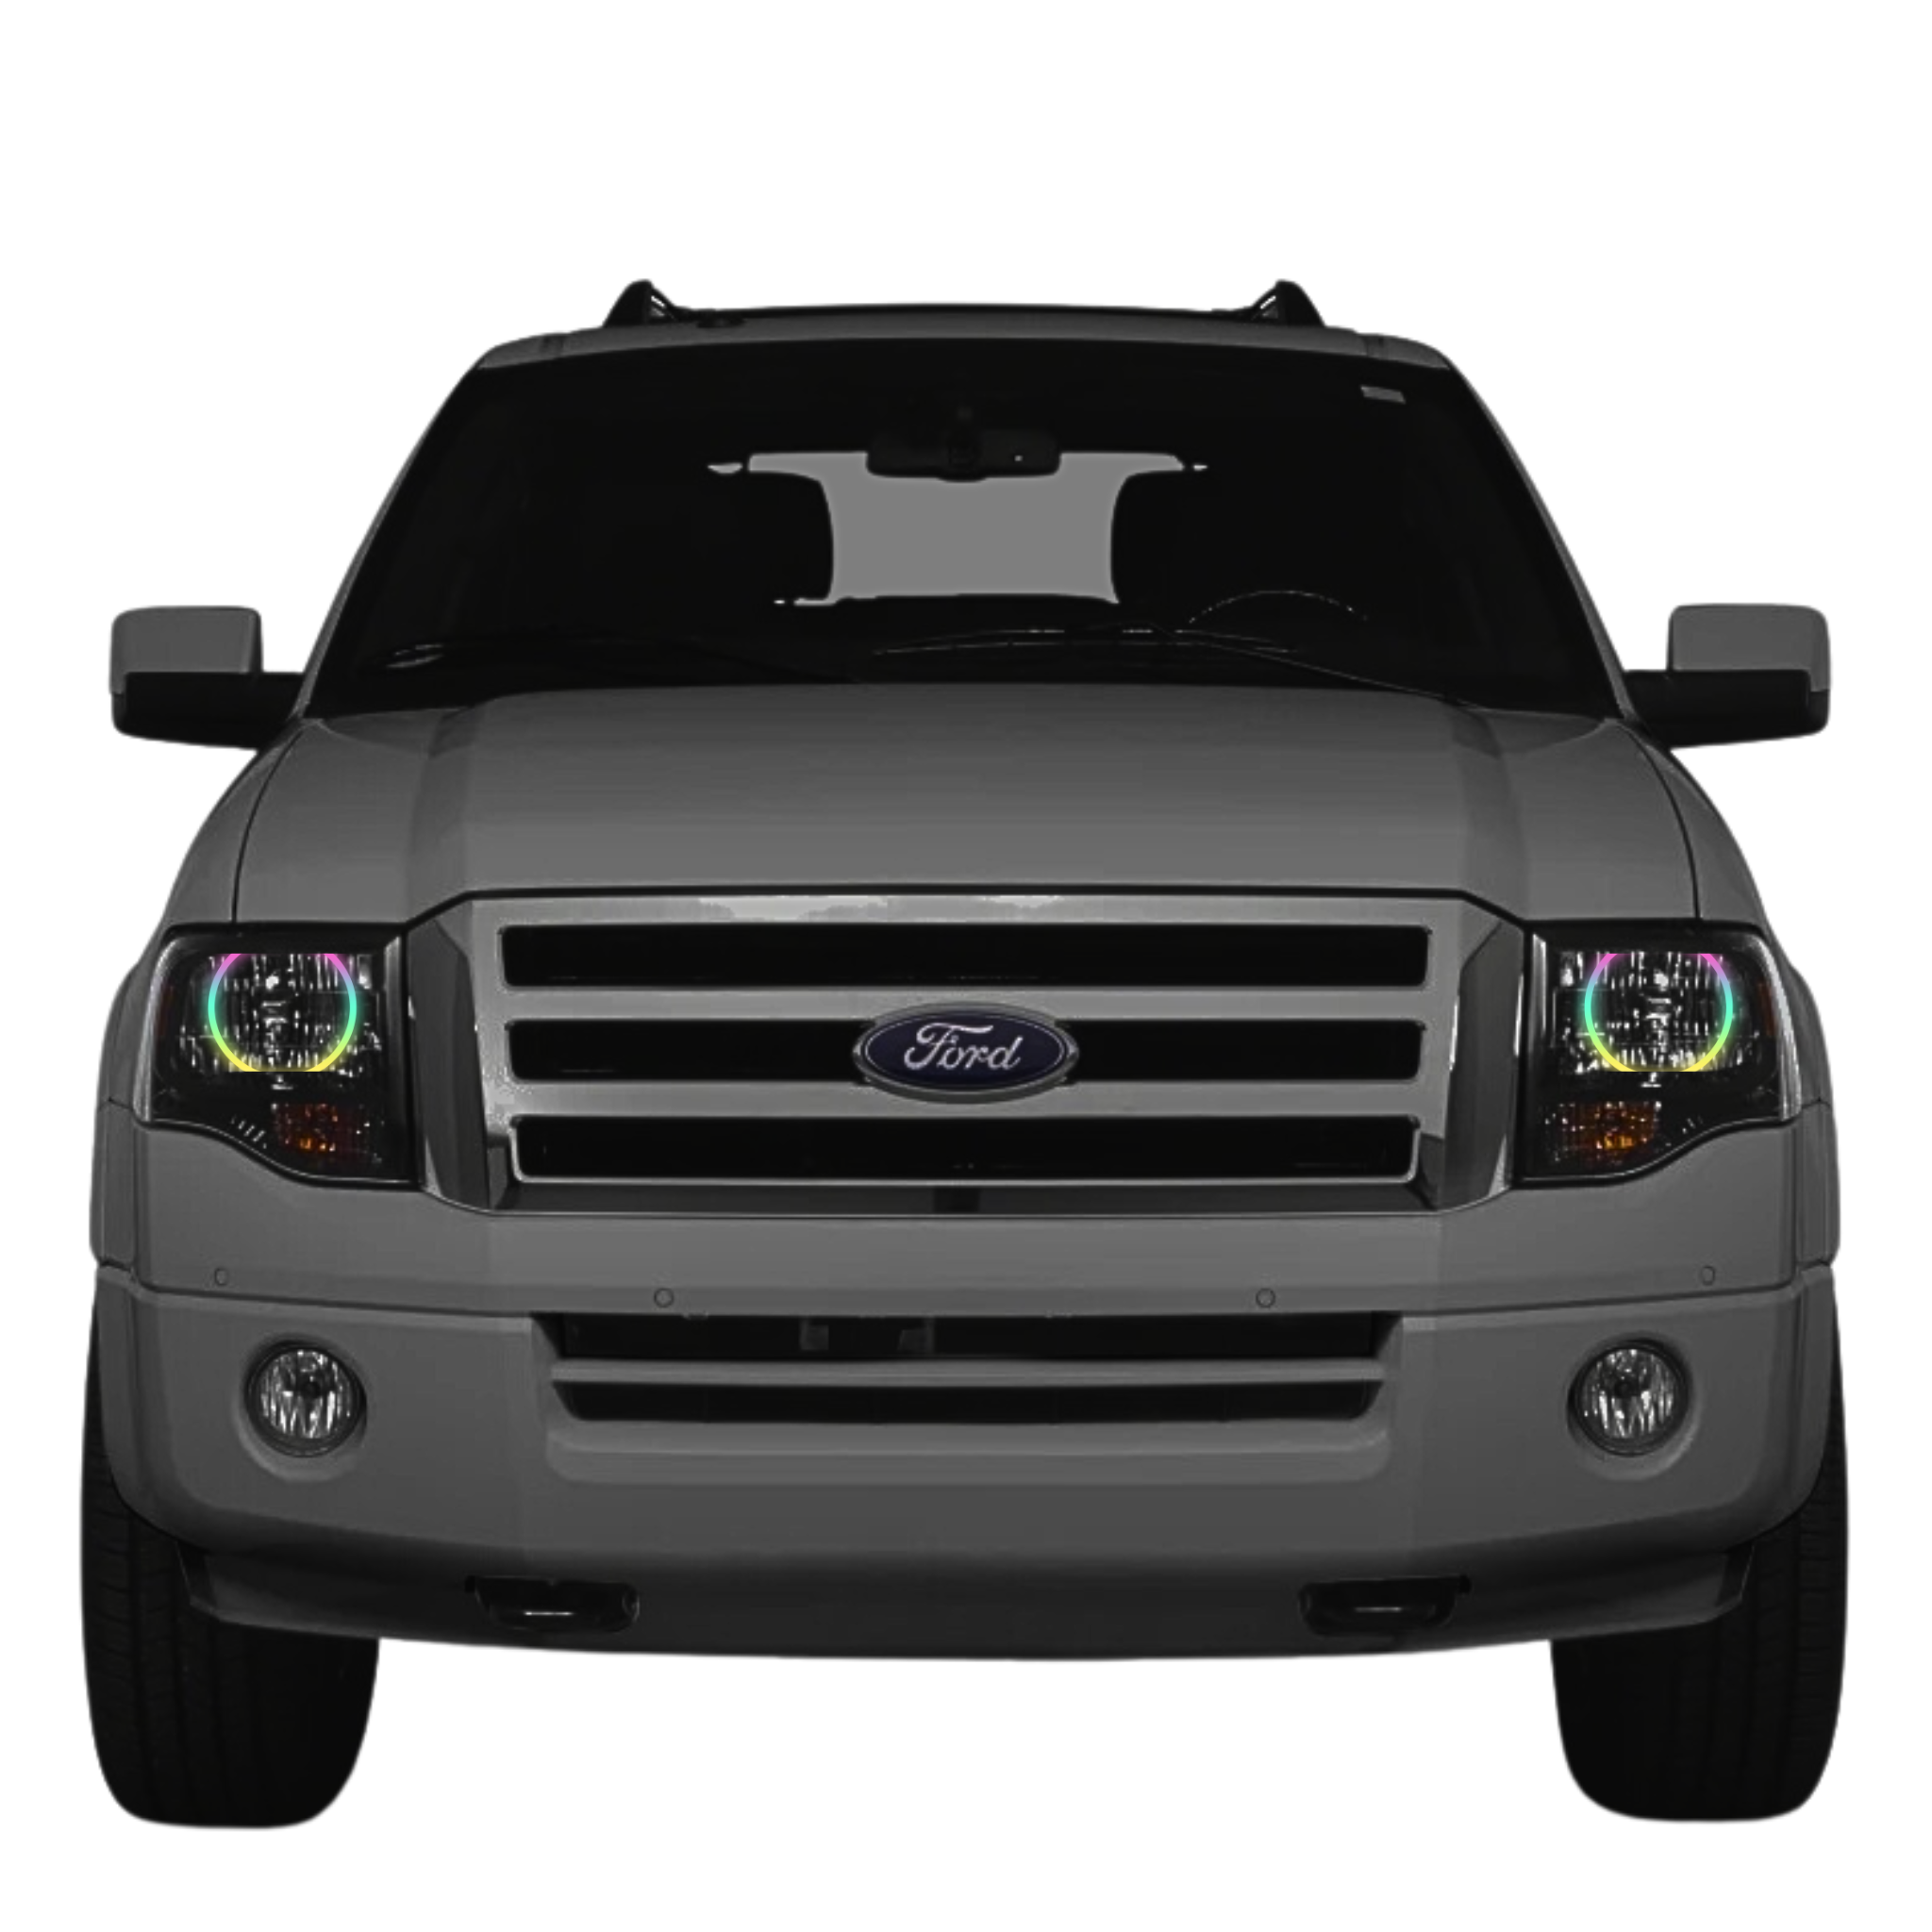 2007-2014 Ford expedition Multicolor Halo kit - RGB Halo Kits Multicolor Flow Series Color Chasing RGBWA LED headlight kit Colorshift Oracle Lighting Trendz OneUpLighting Morimoto theretrofitsource AutoLEDTech Diode Dynamics